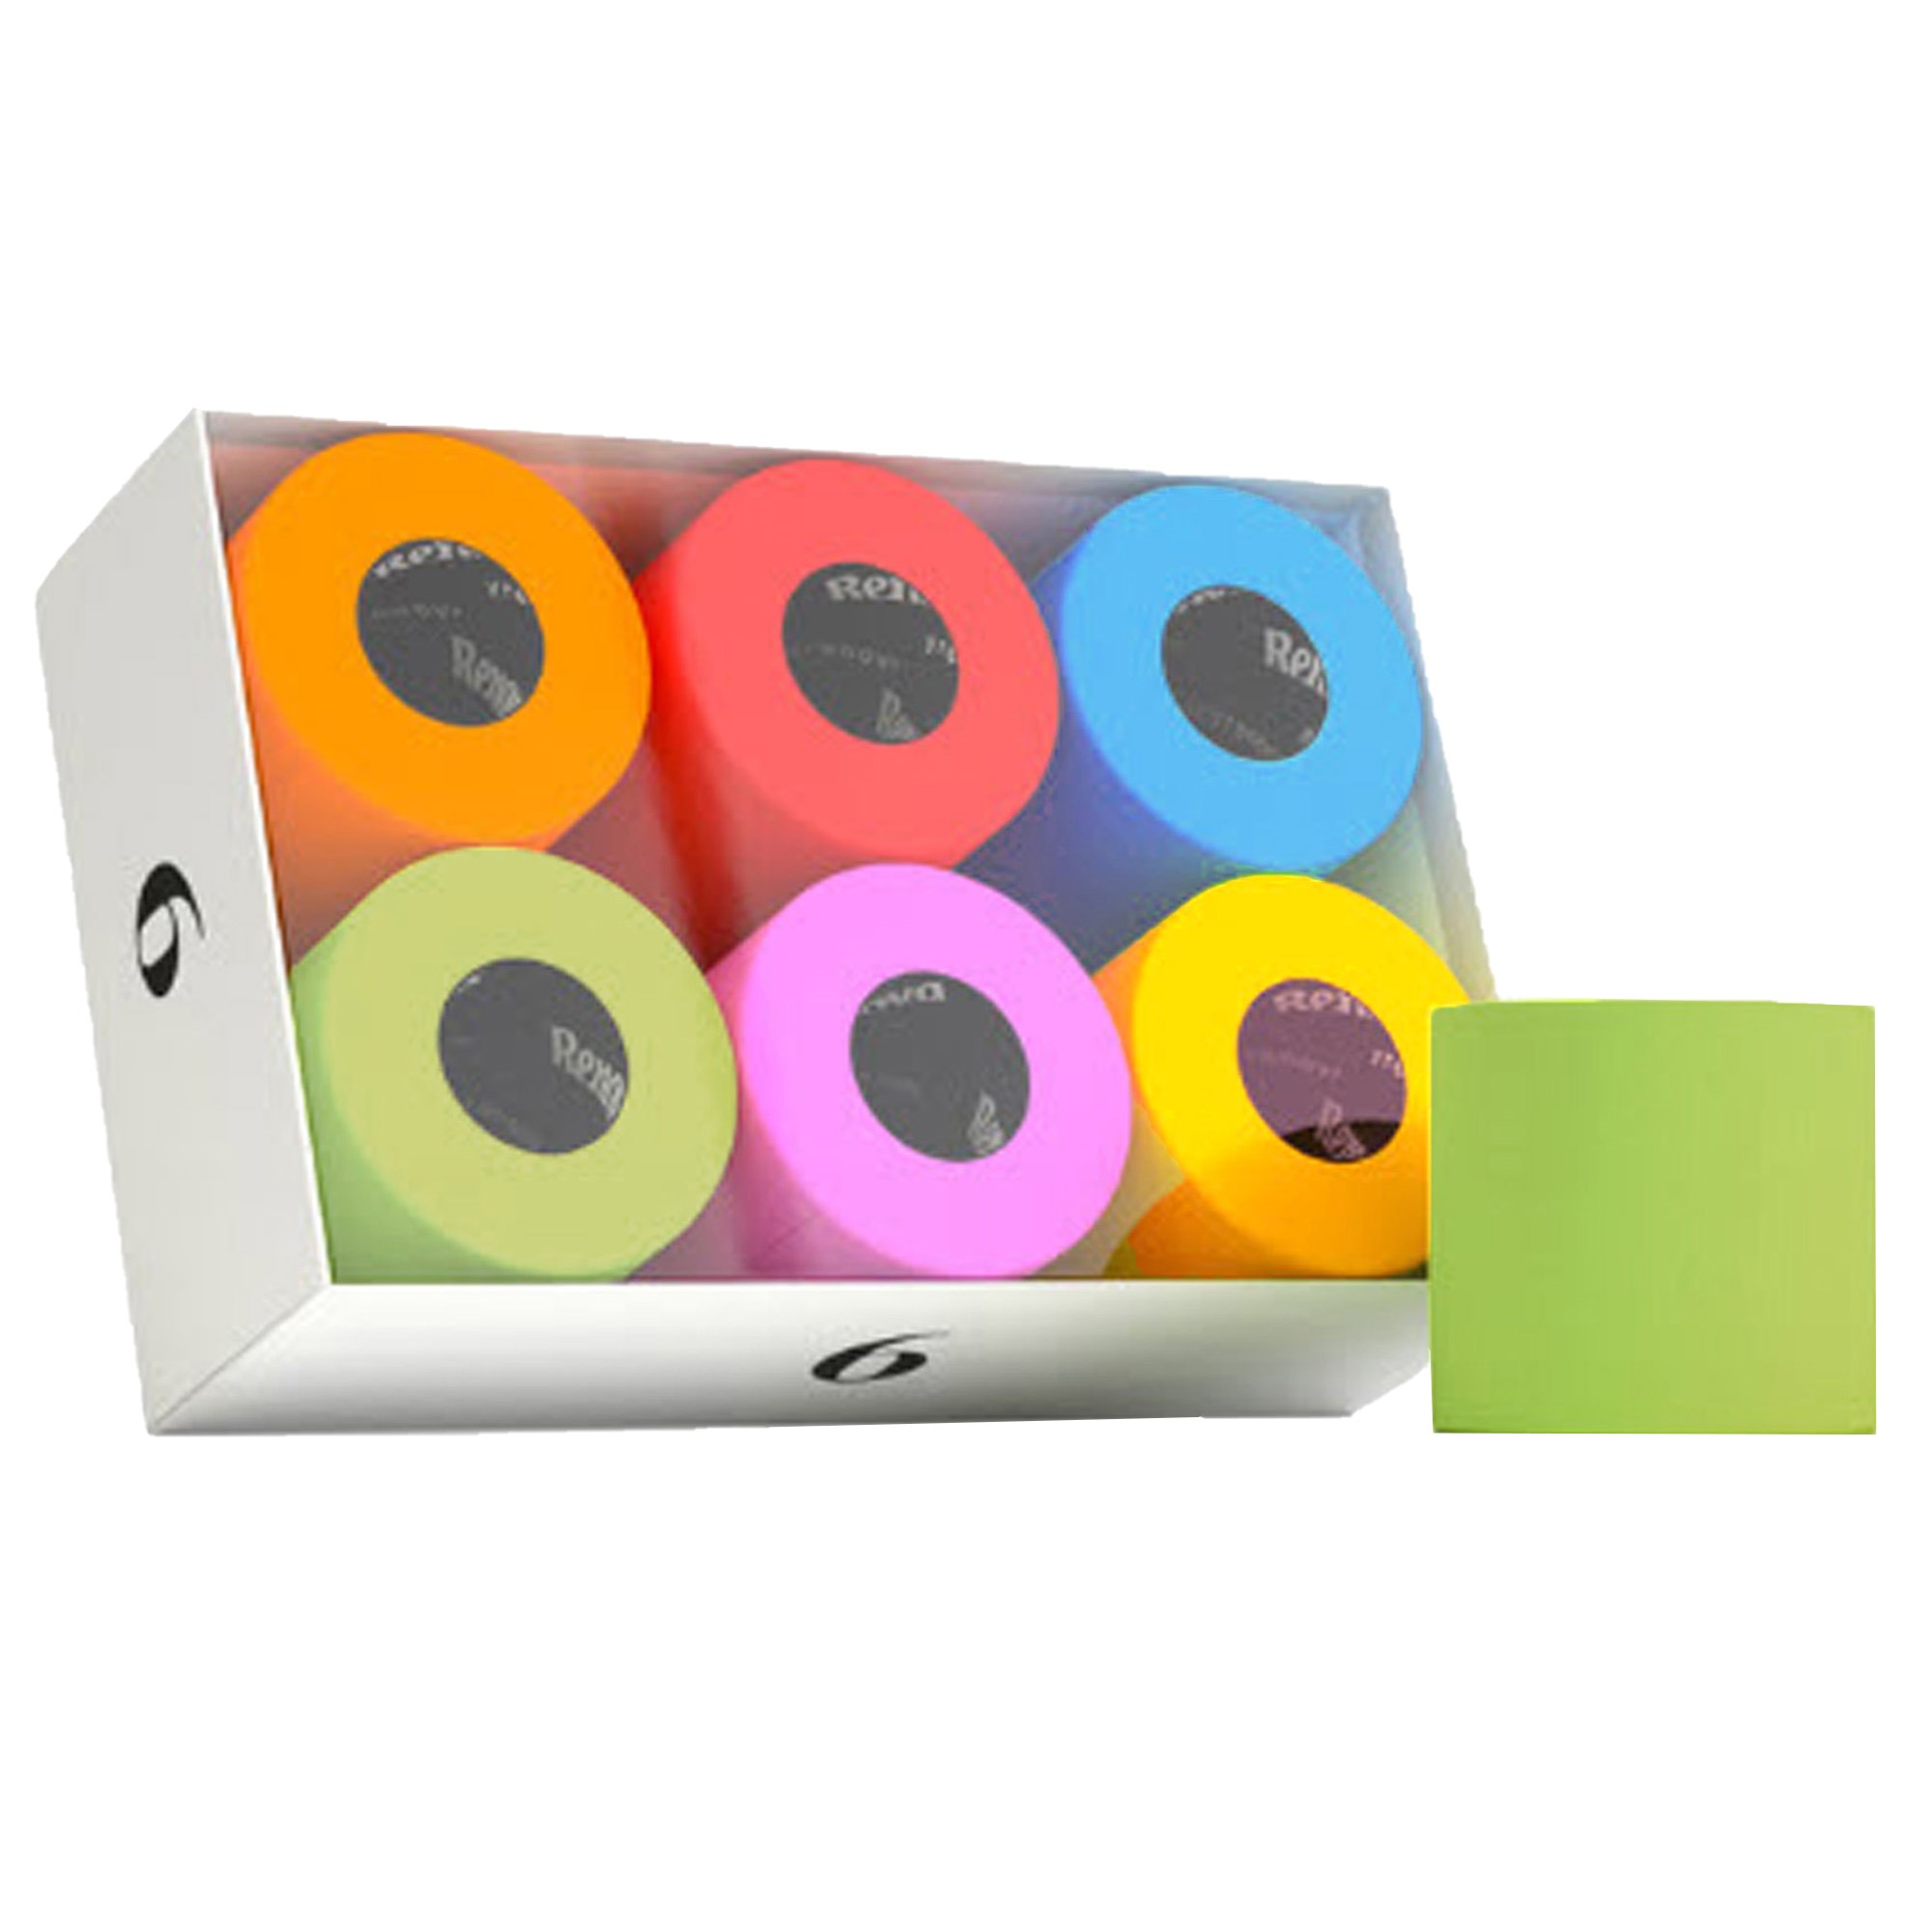 Gift Box Toilet Paper - 3 Ply - 6 Multicolor Rolls - 140 Premium Quality Sheets 96